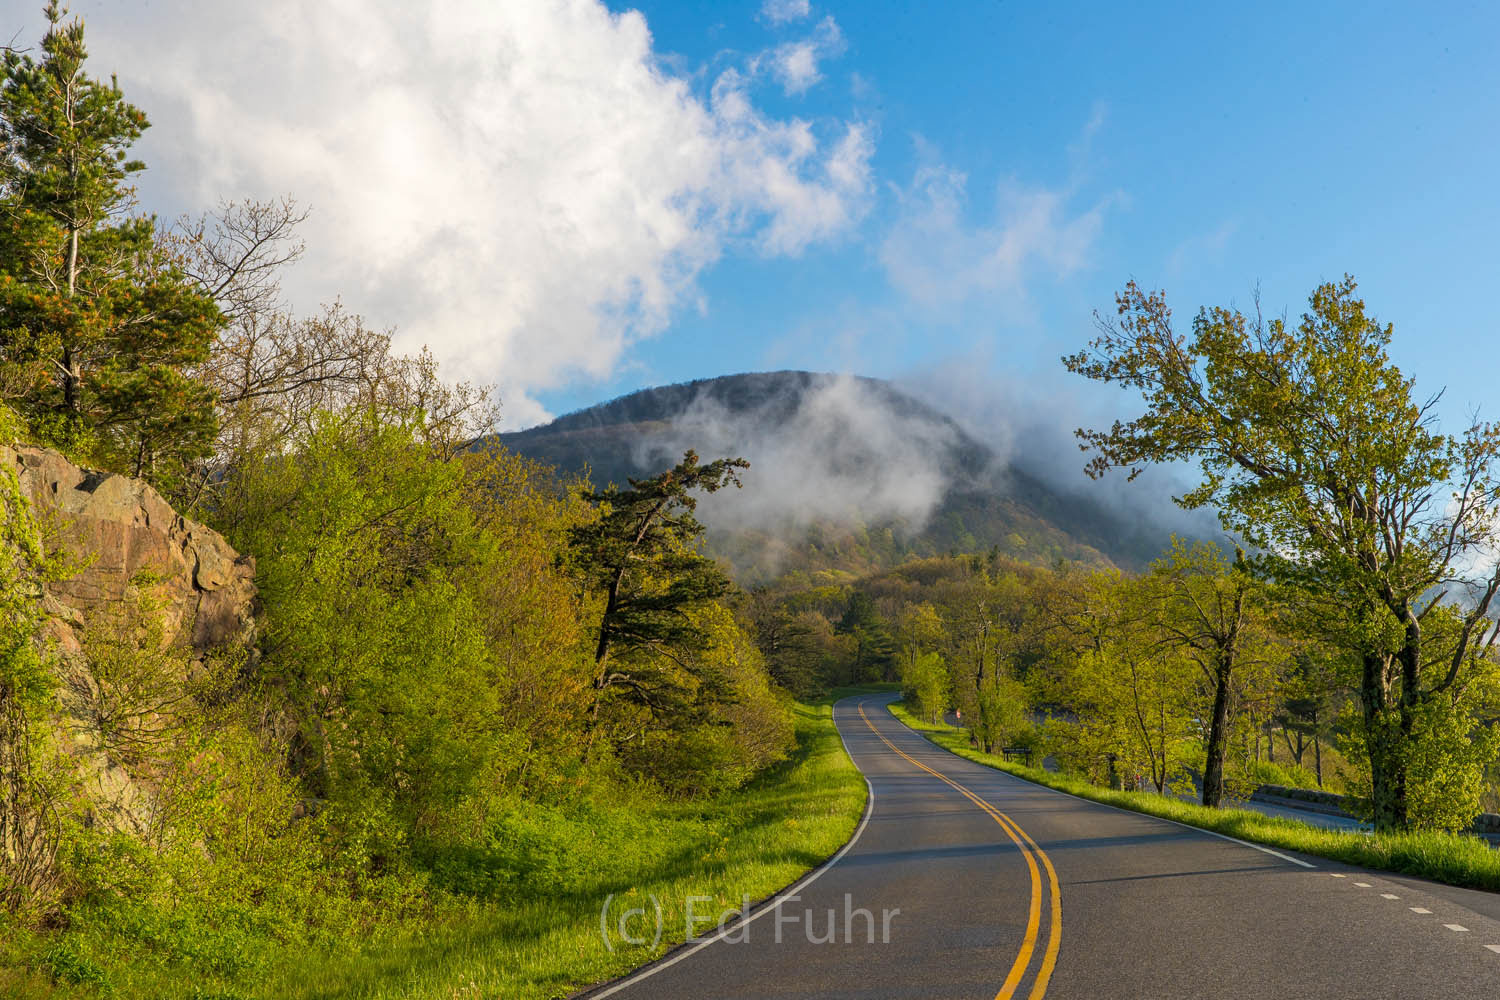 A stunning approach to Stony Man mountain from the north, Skyline Drive curves gracefully, flanked by colorful flowers in summer...